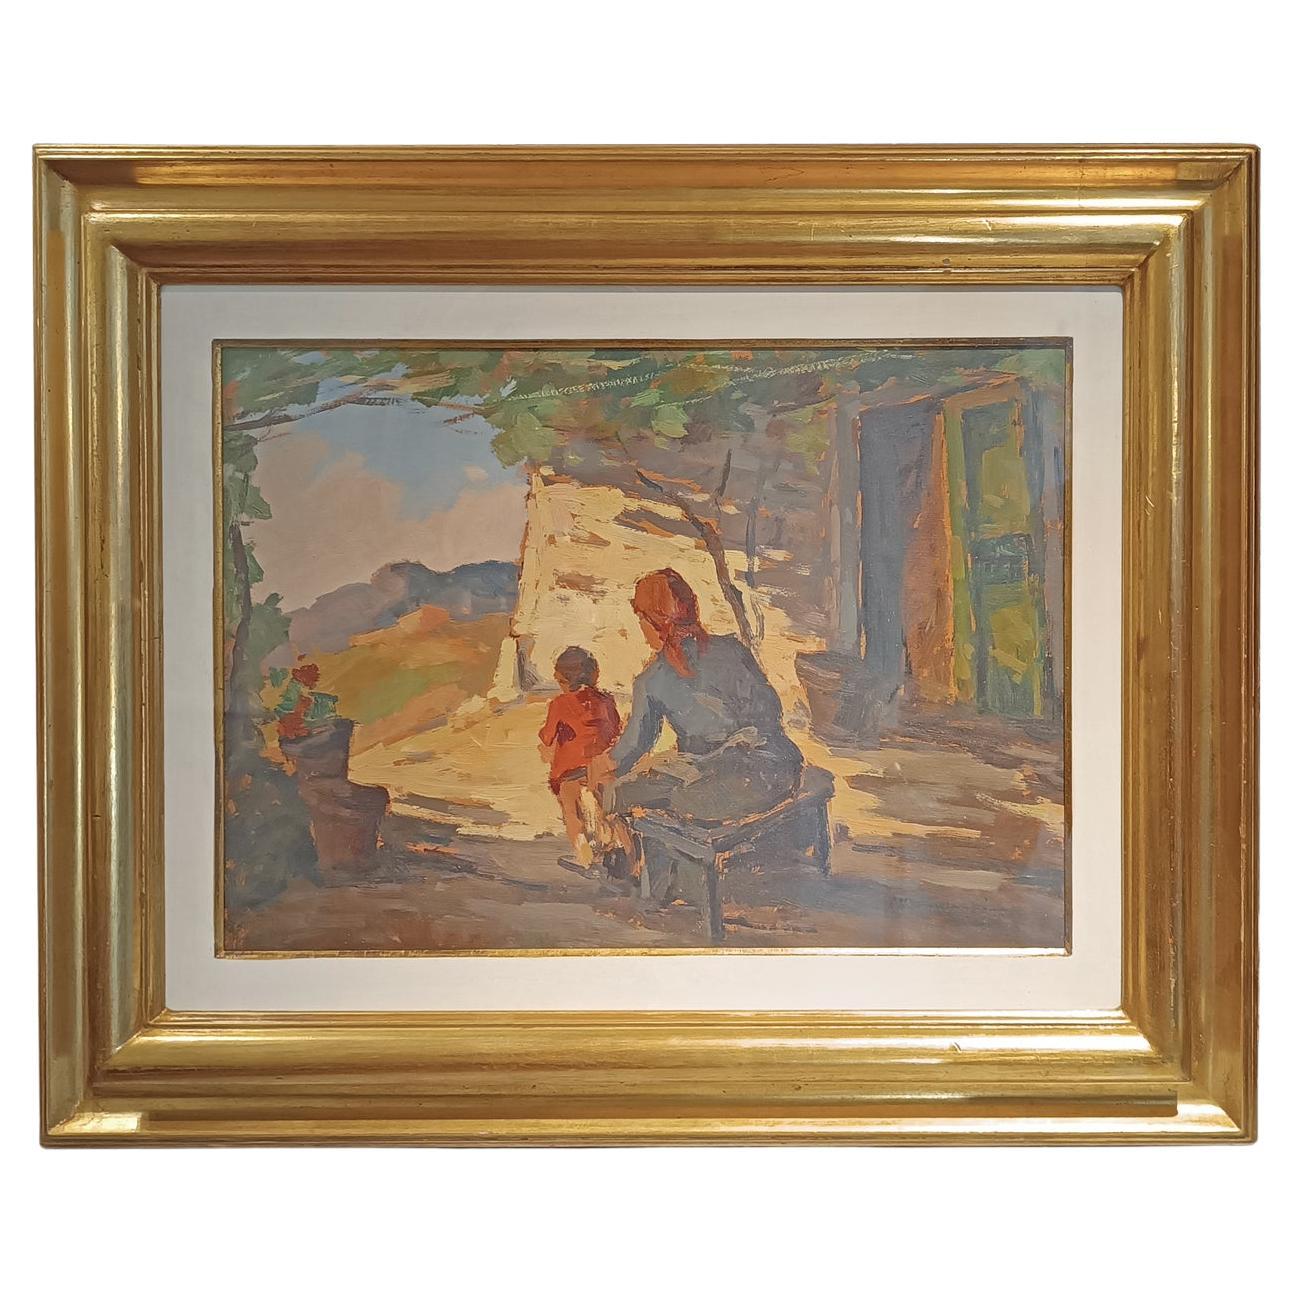 20th CENTURY CARLO DOMENICI'S RURAL SCENE WITH WOMAN AND CHILD For Sale